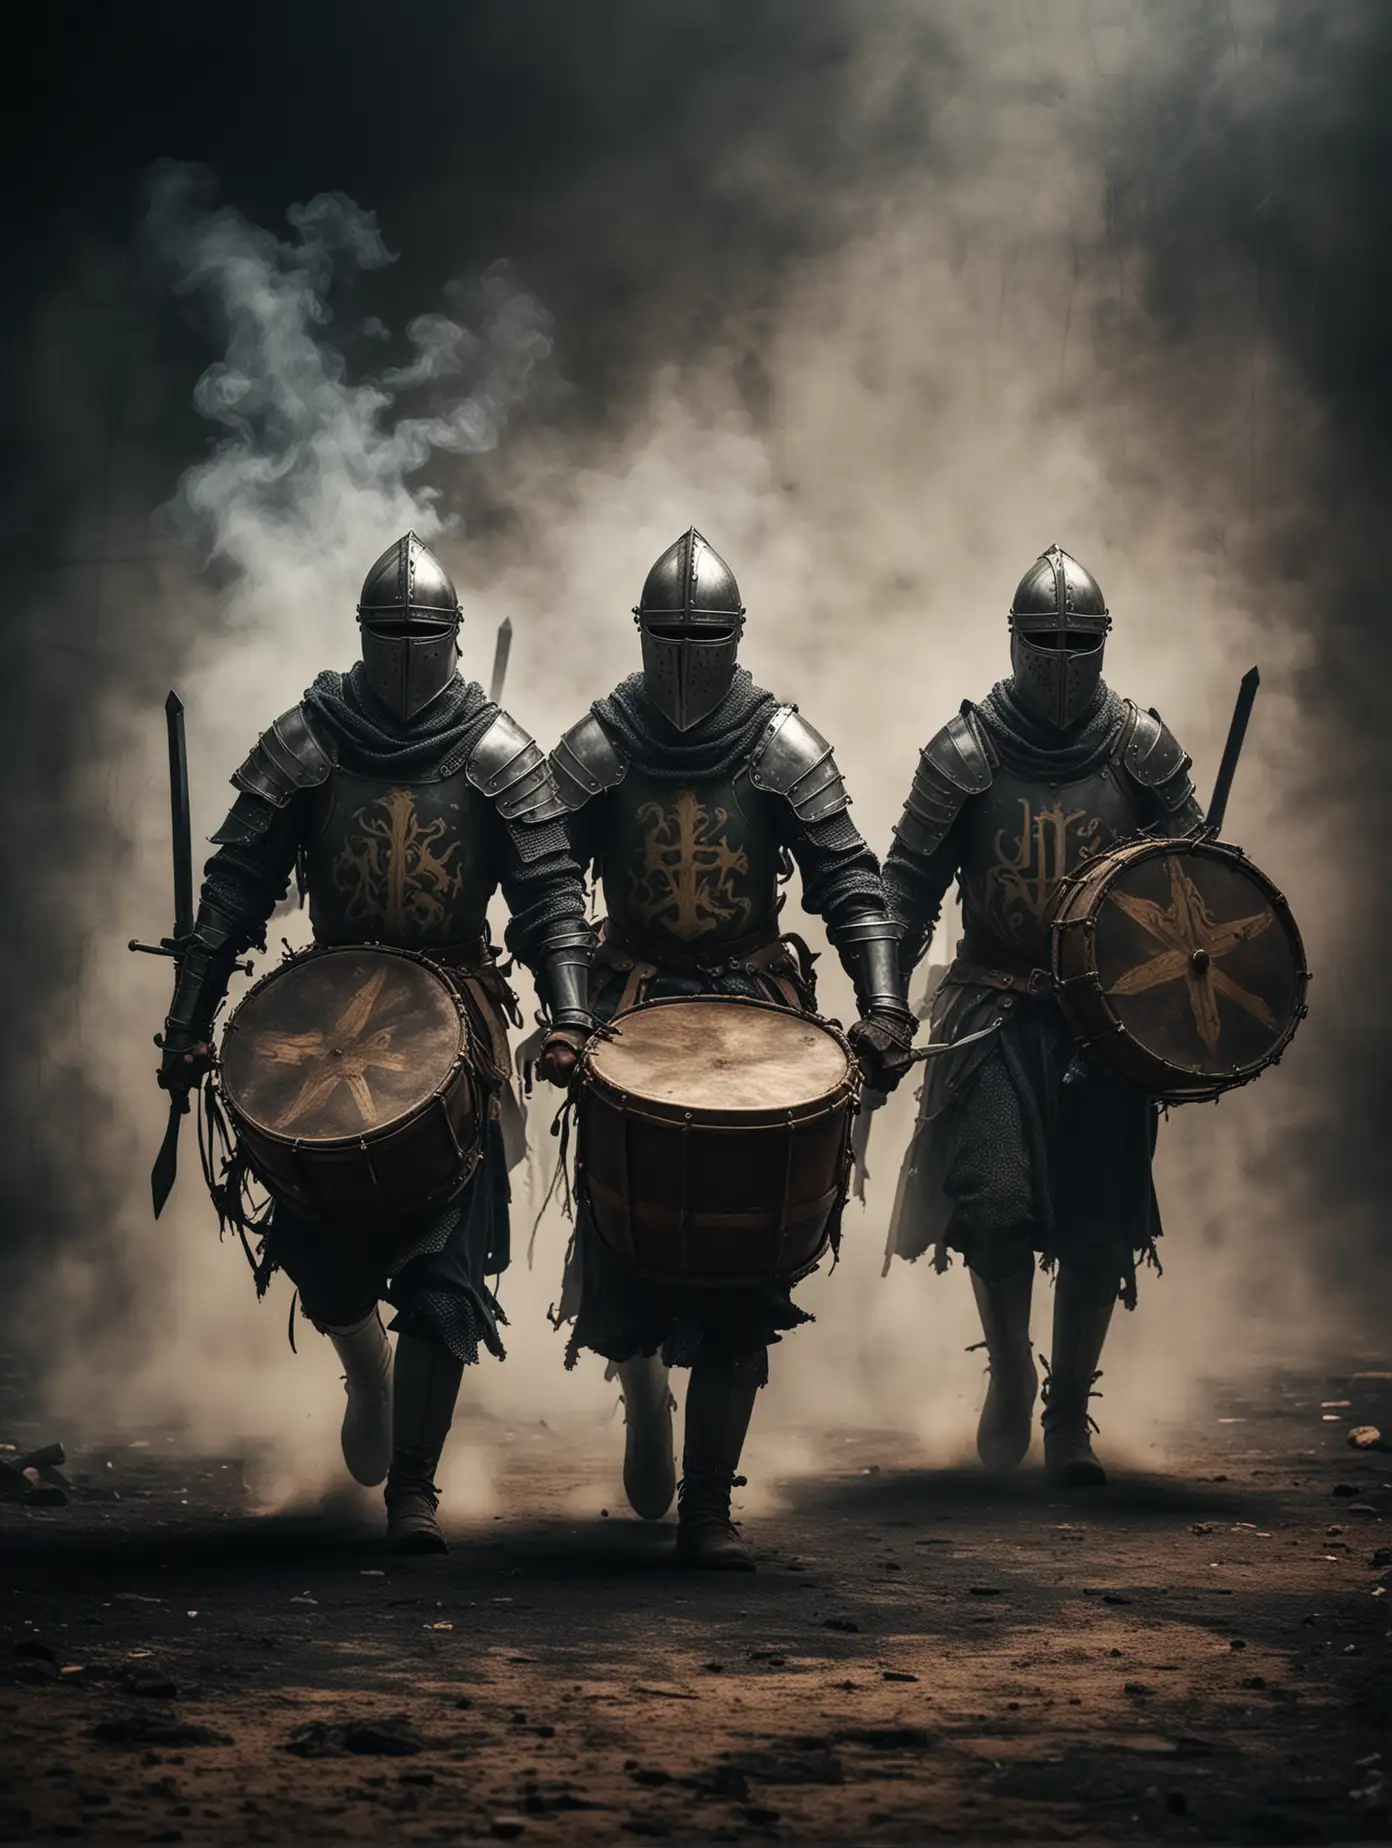 medieval knights marching into battle, two beating drums, two with swords drawn against a dark smoky background, menacing